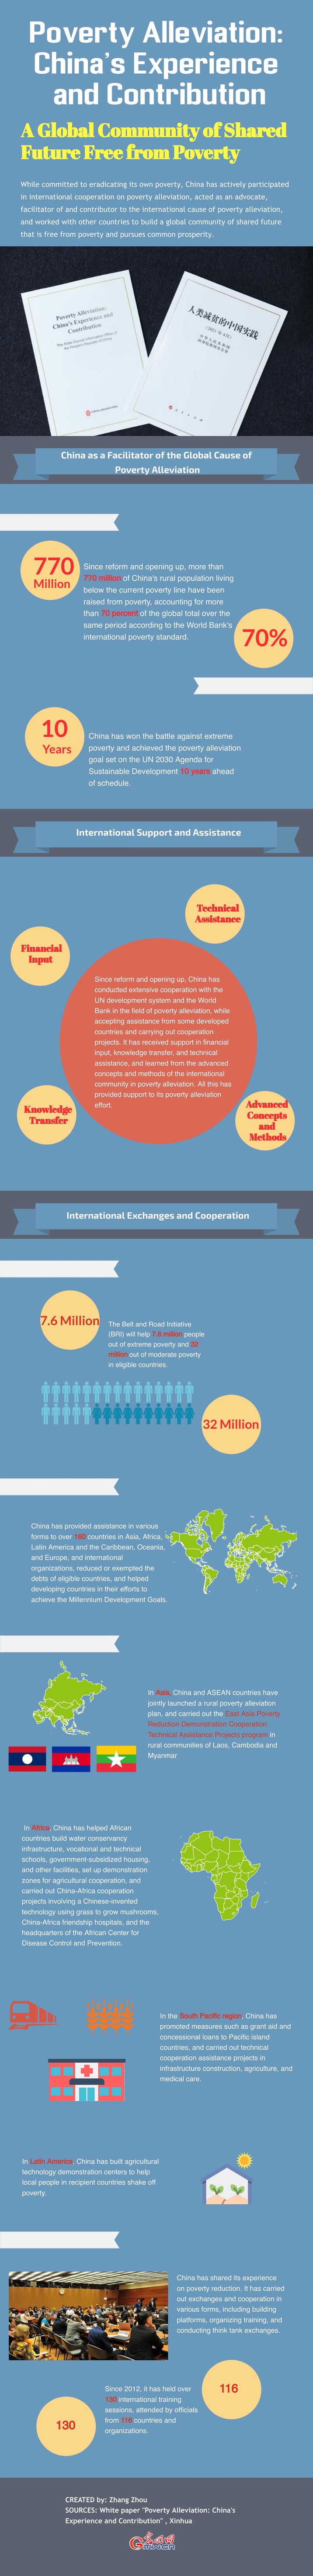 Infographic: China's contribution to a global community of shared future free from poverty